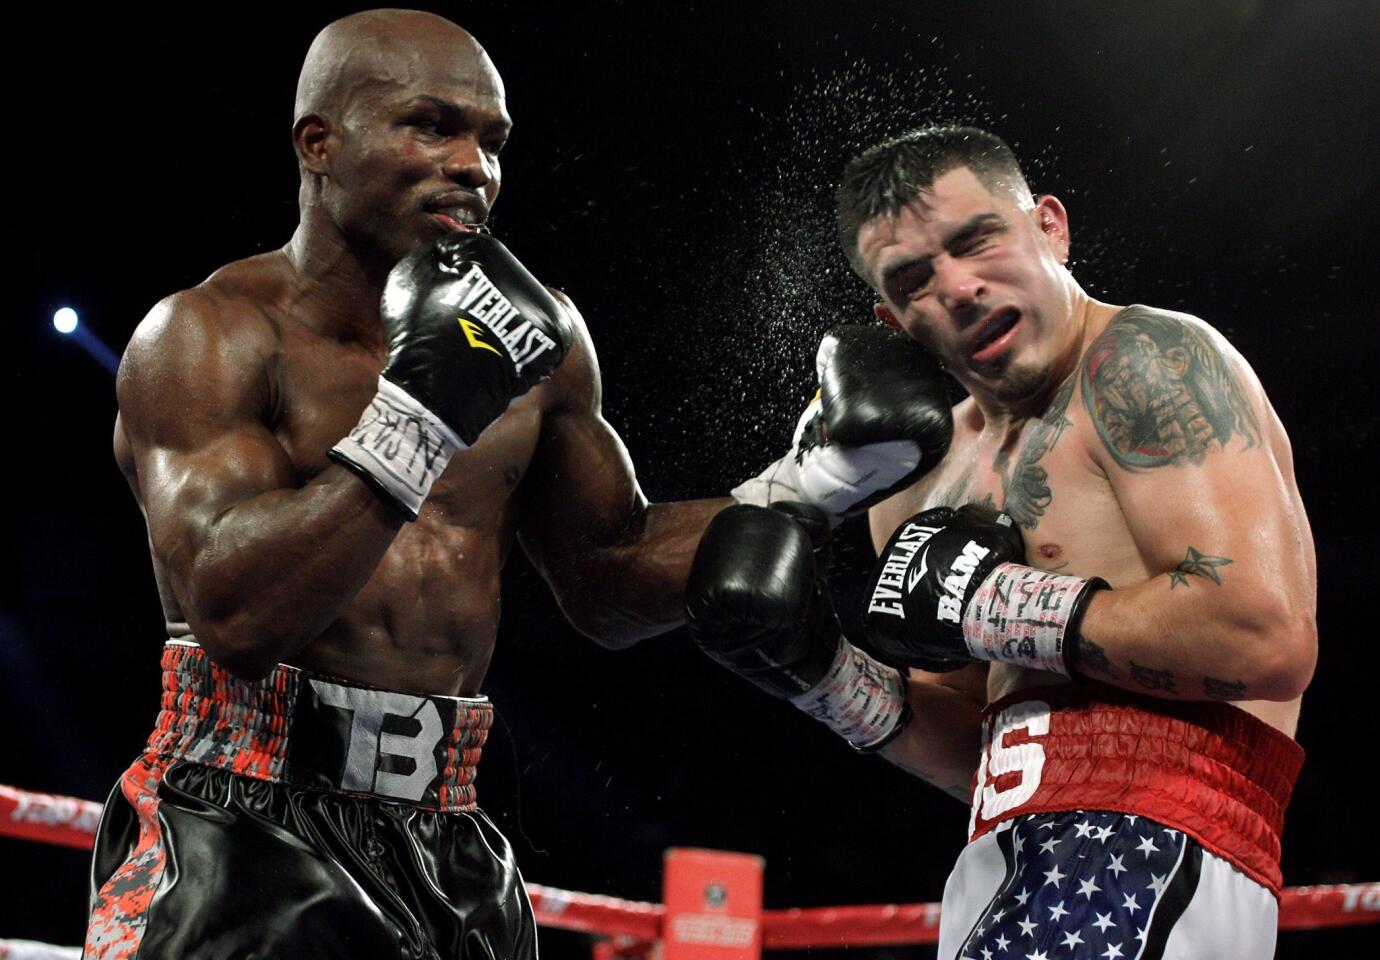 Champion Timothy Bradley (L) connects with a left against challenger Brandon Rios (R) at the Thomas & Mack Center in Las Vegas, Nevada. Bradley retained his welterweight title by technical knockout at 2:49 of the ninth round.